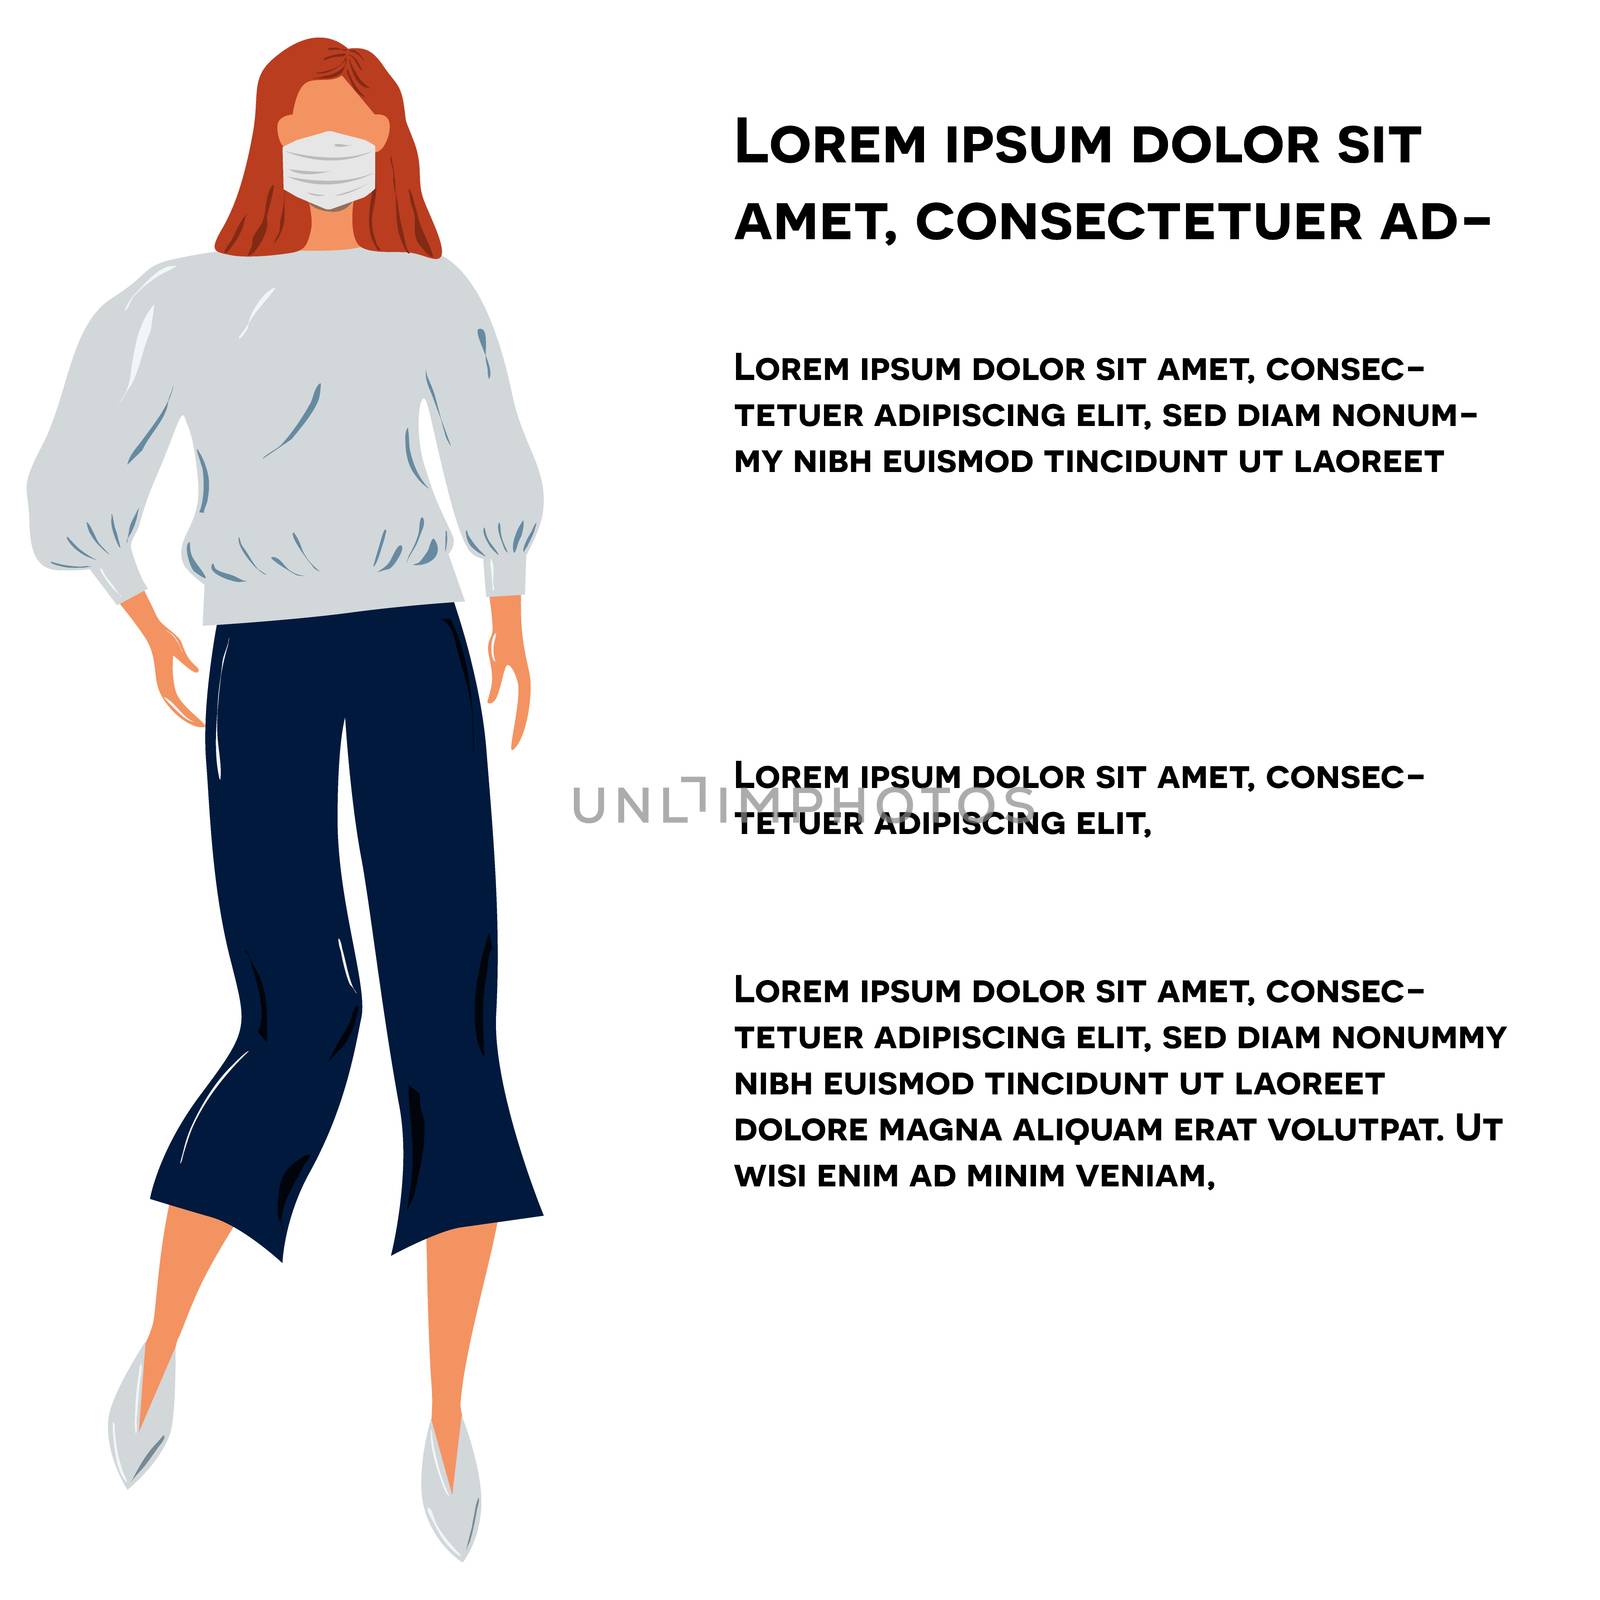 Girl in culottes and matching top protective face mask. Latest trend news, fashion bloggers post. Flat cartoon illustration with copyspace on white background. Vector illustration.